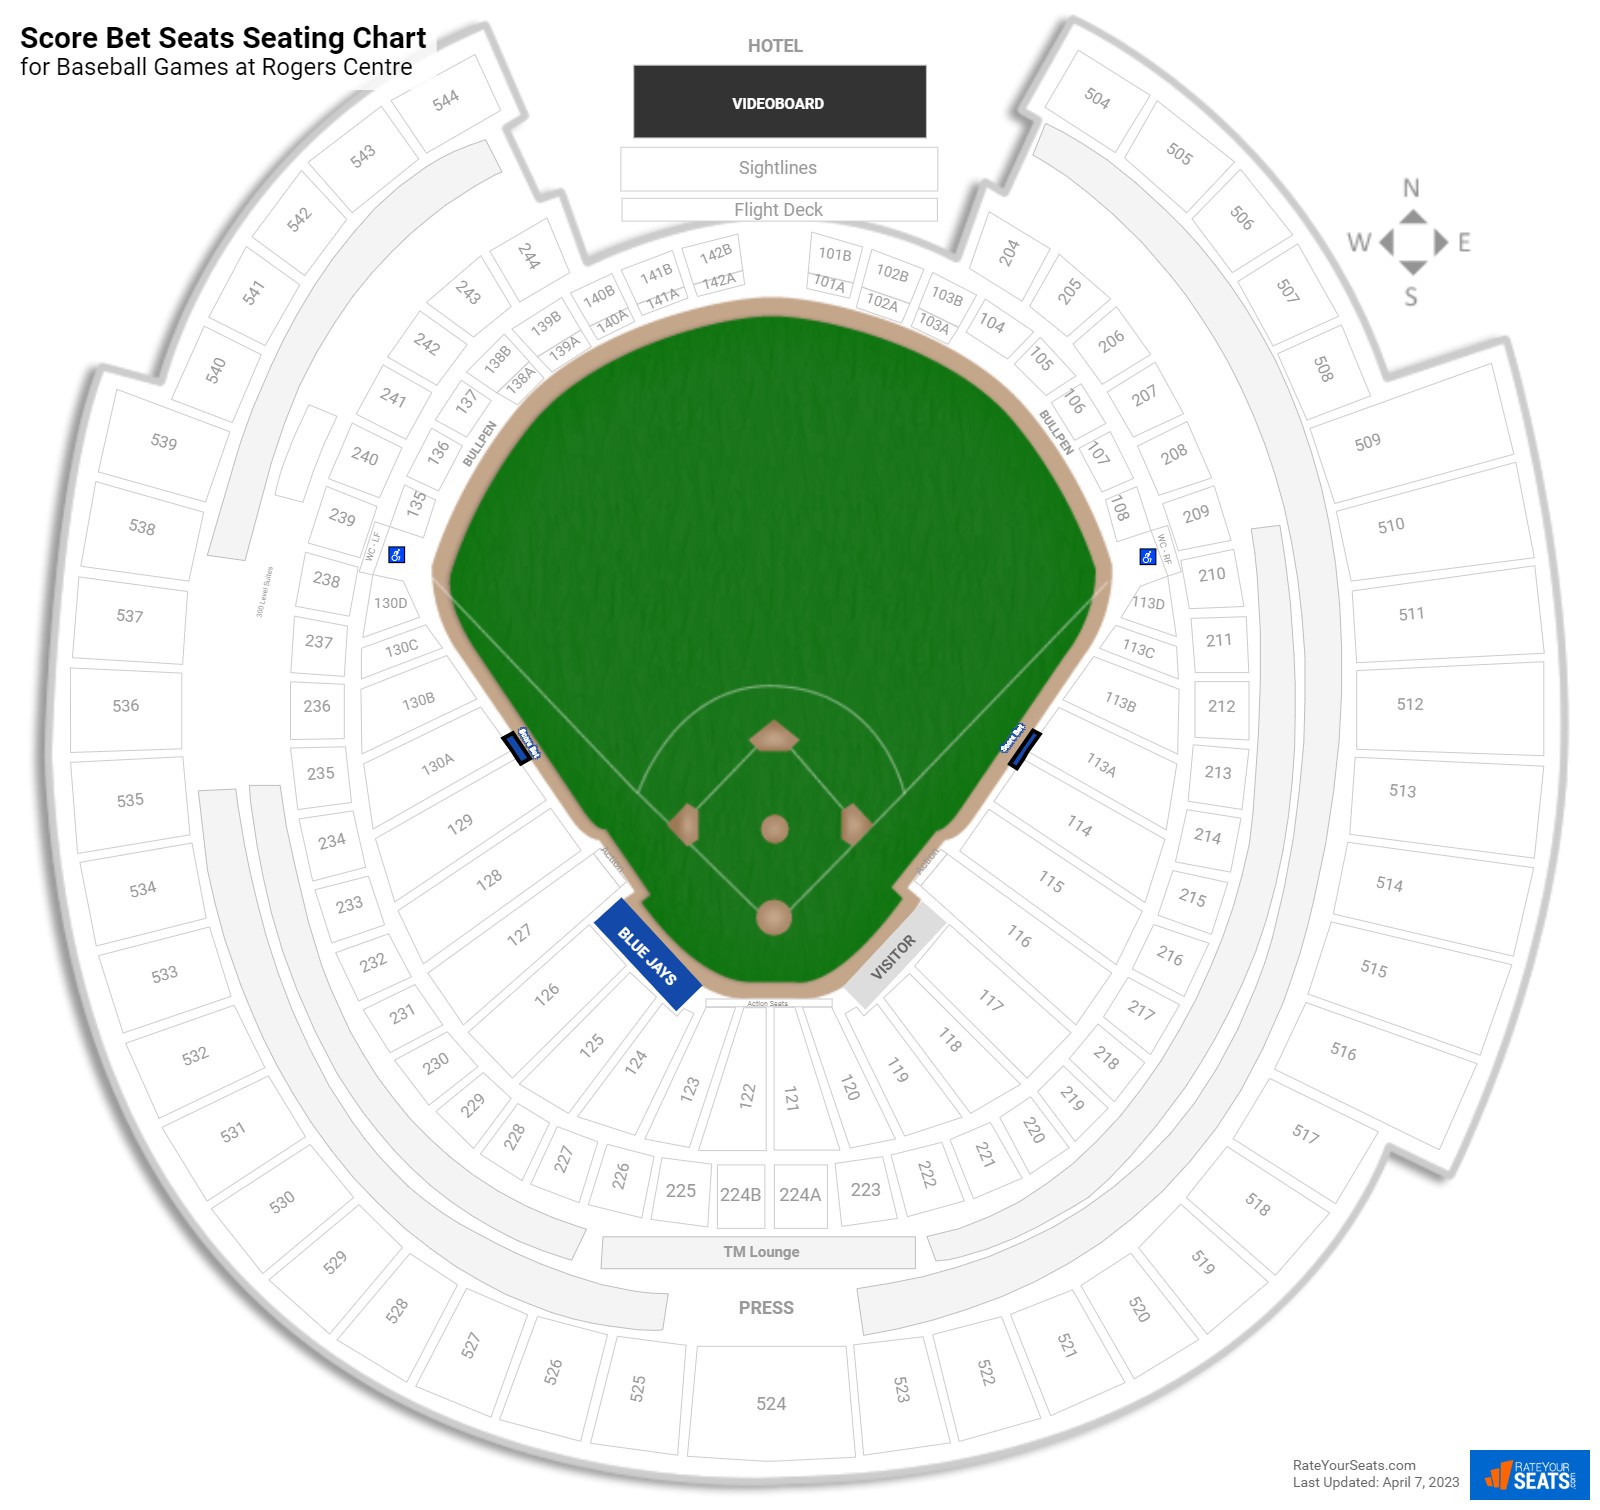 Baseball Score Bet Seats Seating Chart at Rogers Centre